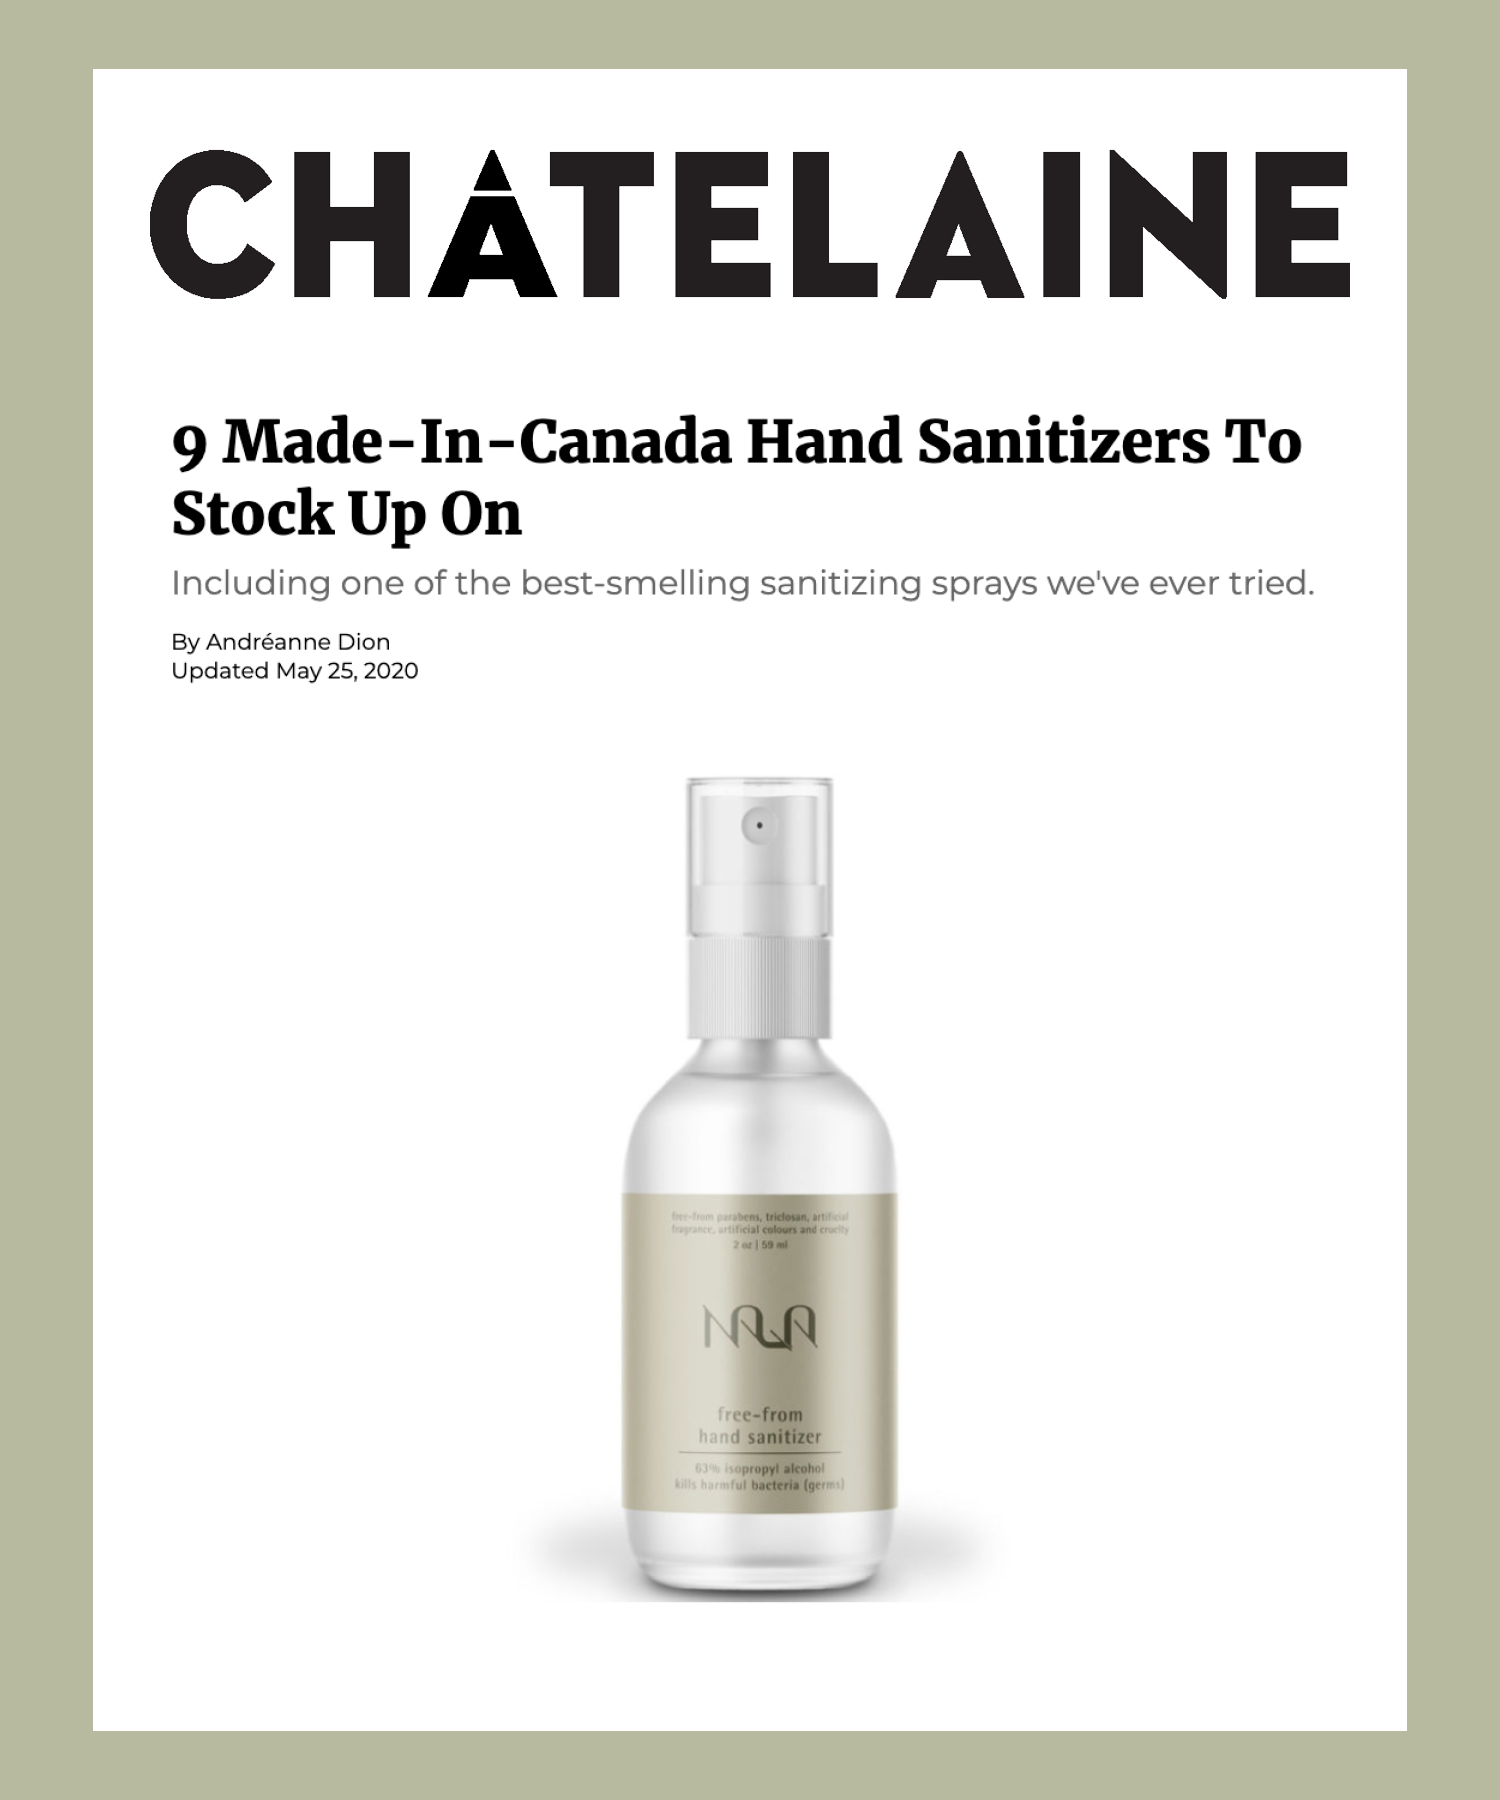 9 Made-In-Canada Hand Sanitizers To Stock Up On